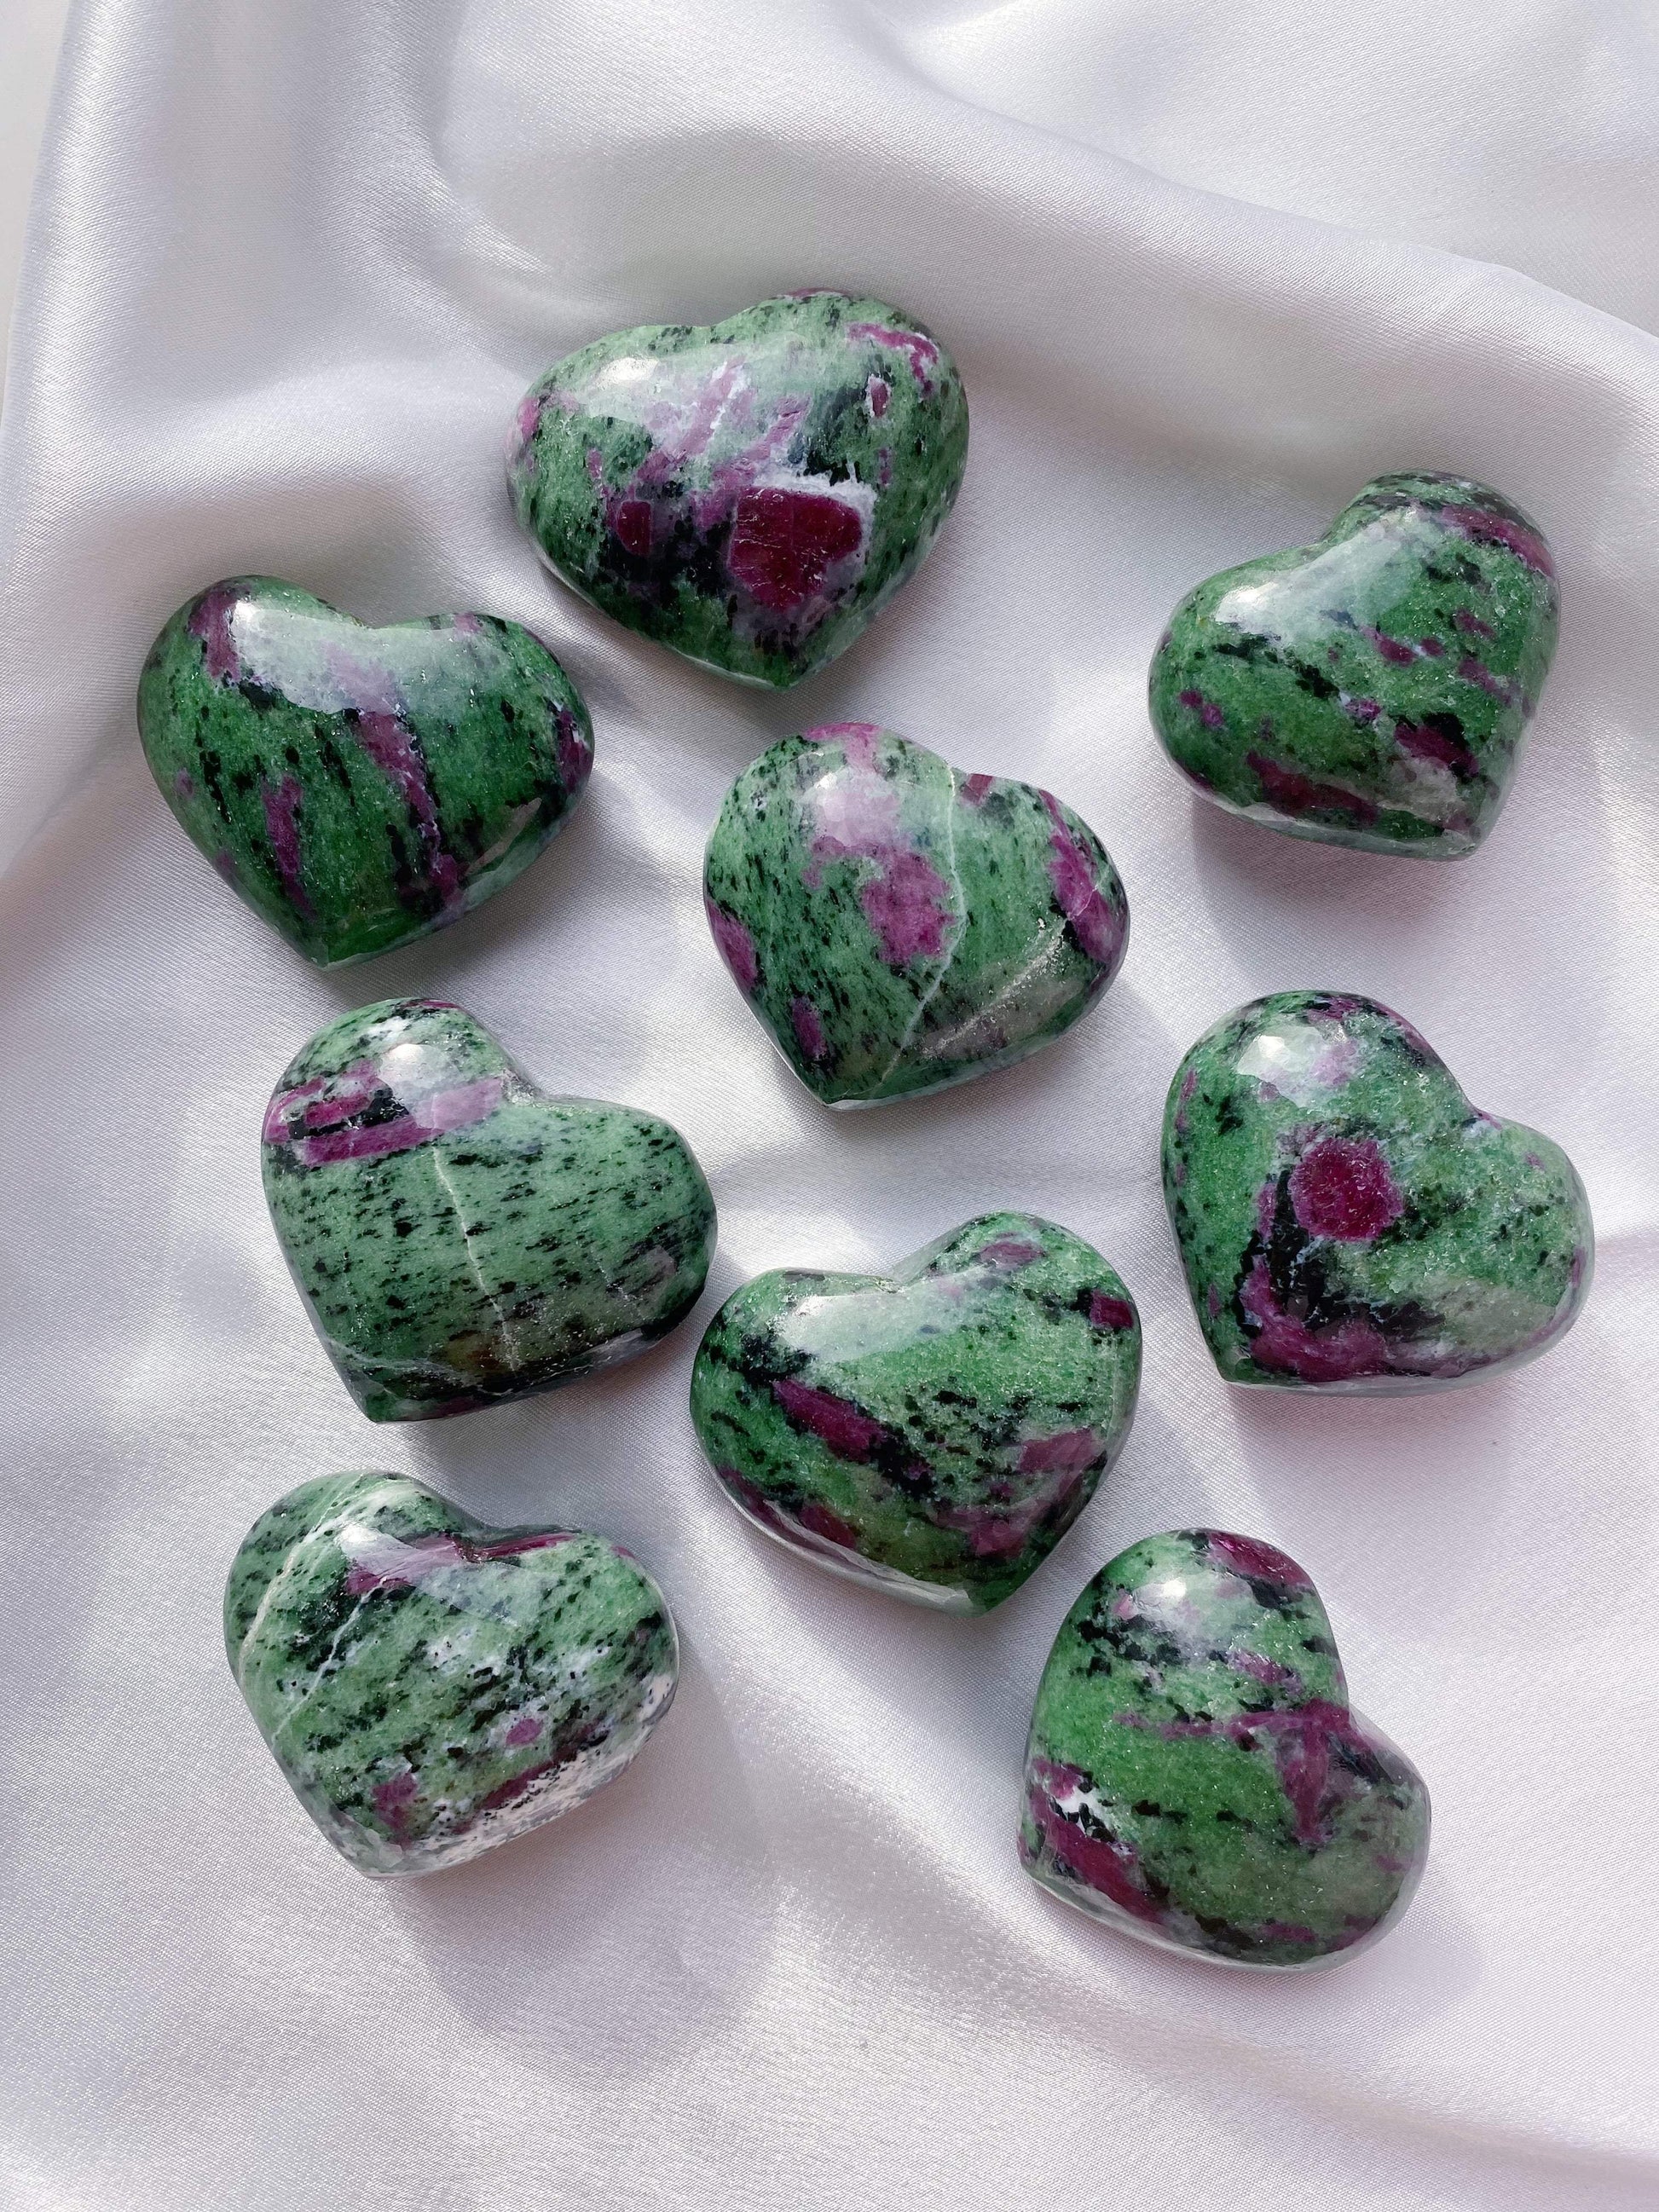 Ruby Zoisite (Anyolite) Hearts - Caring Crystals